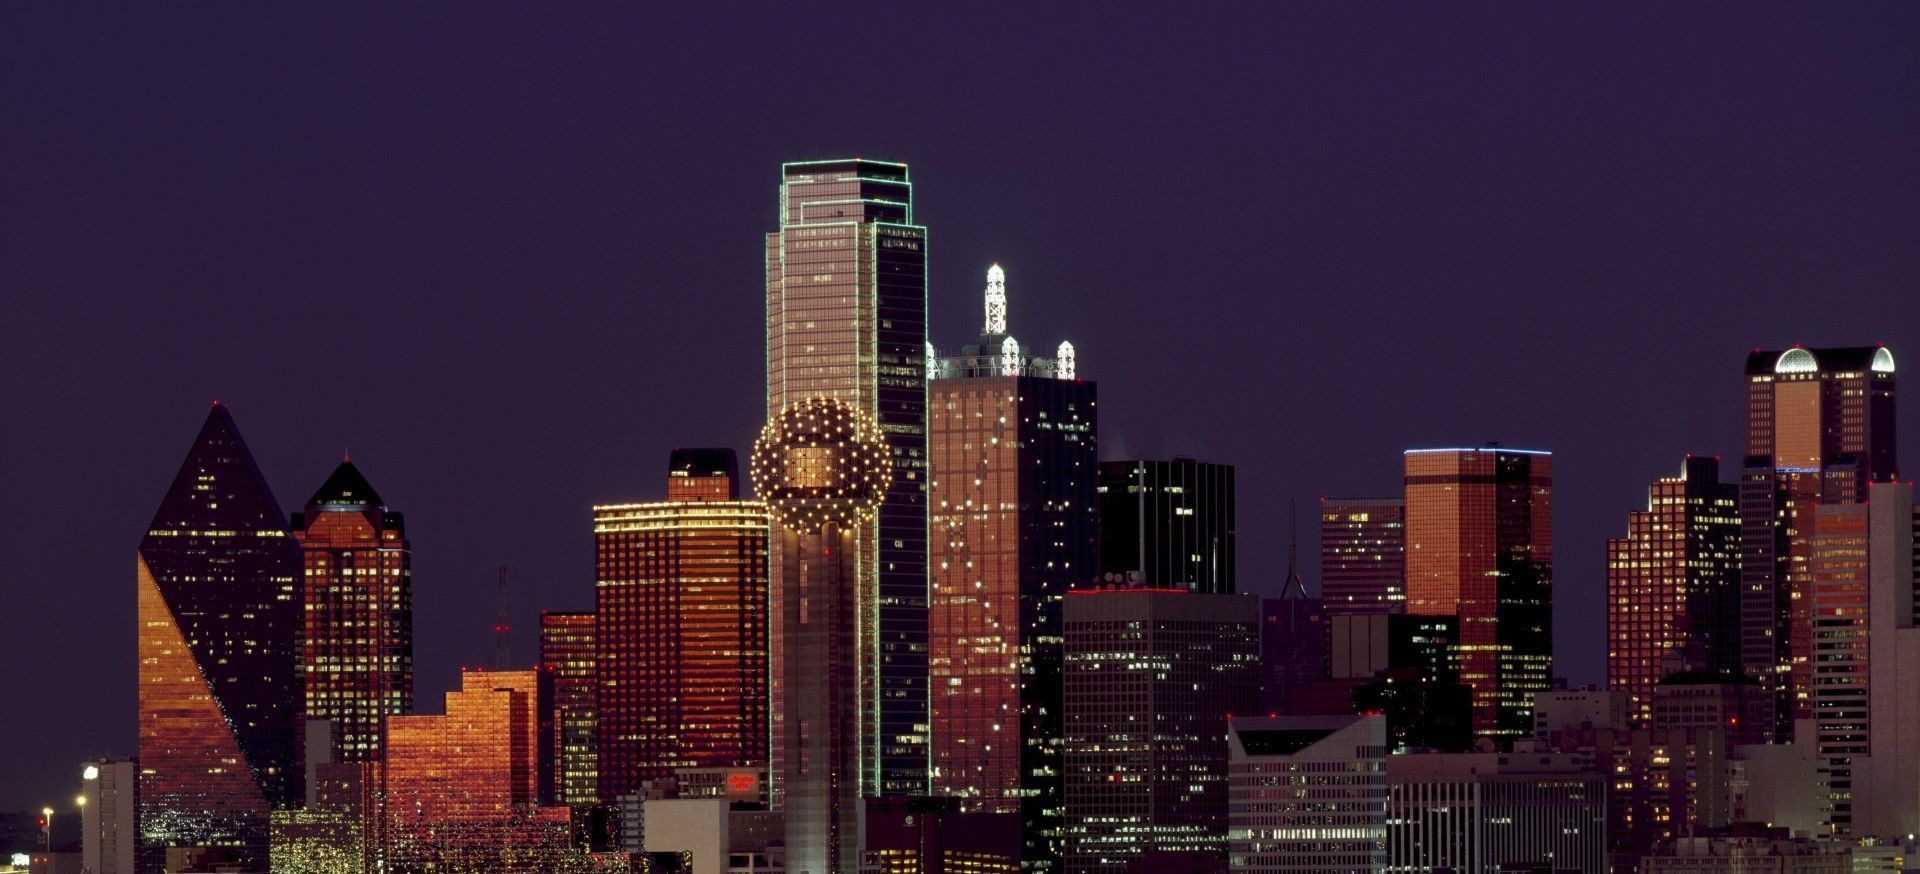 A city skyline at night with many buildings lit up